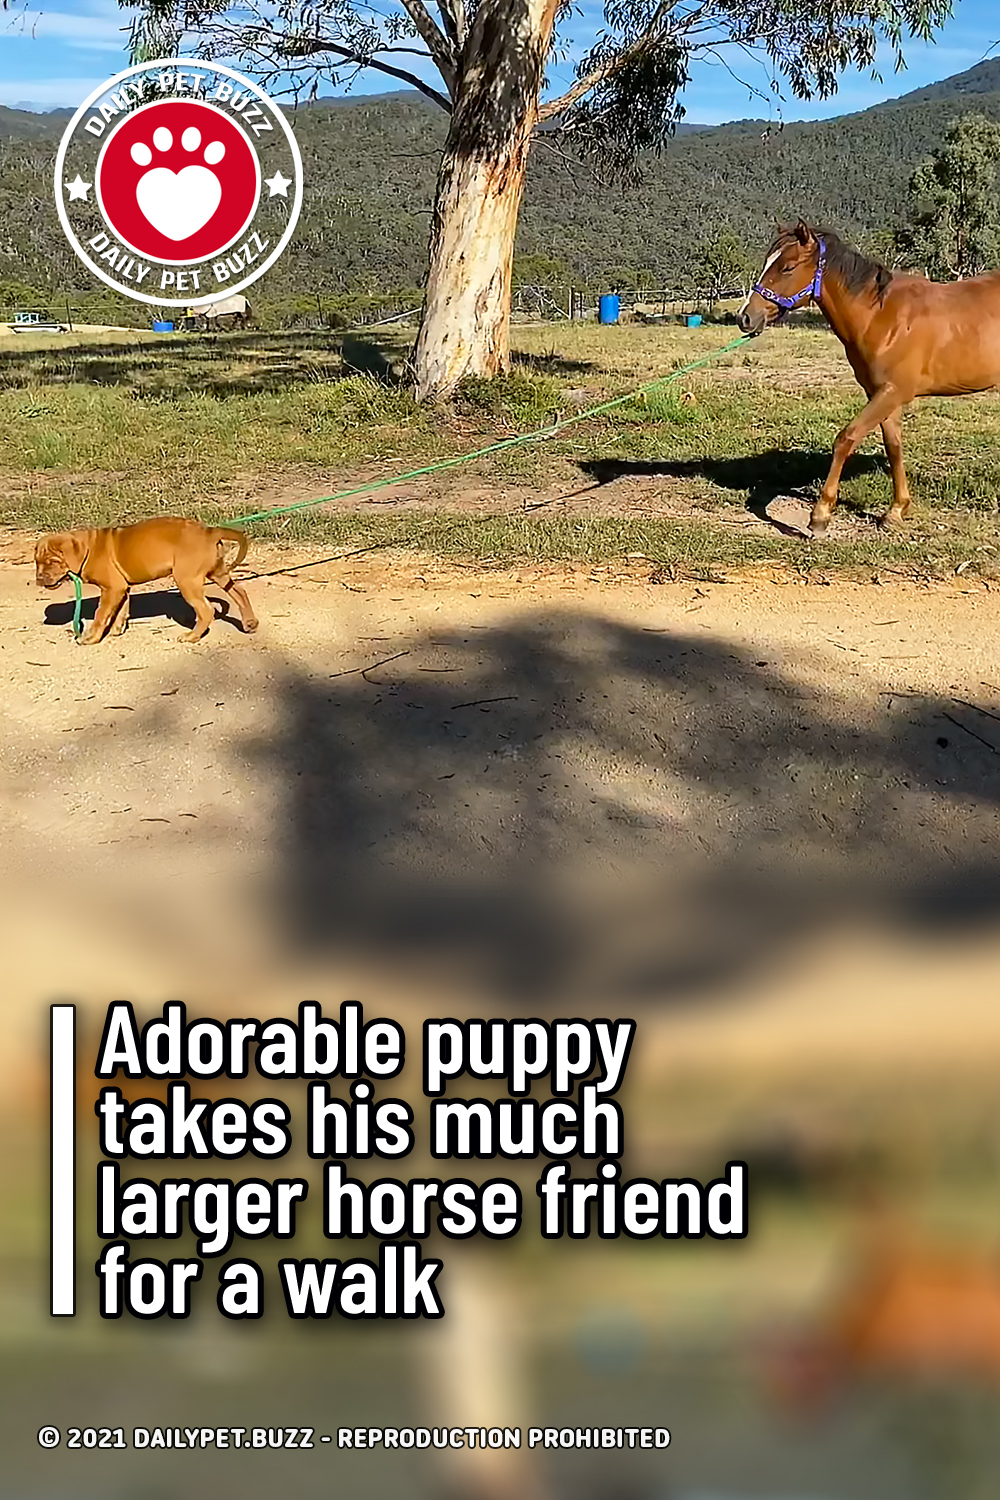 Adorable puppy takes his much larger horse friend for a walk